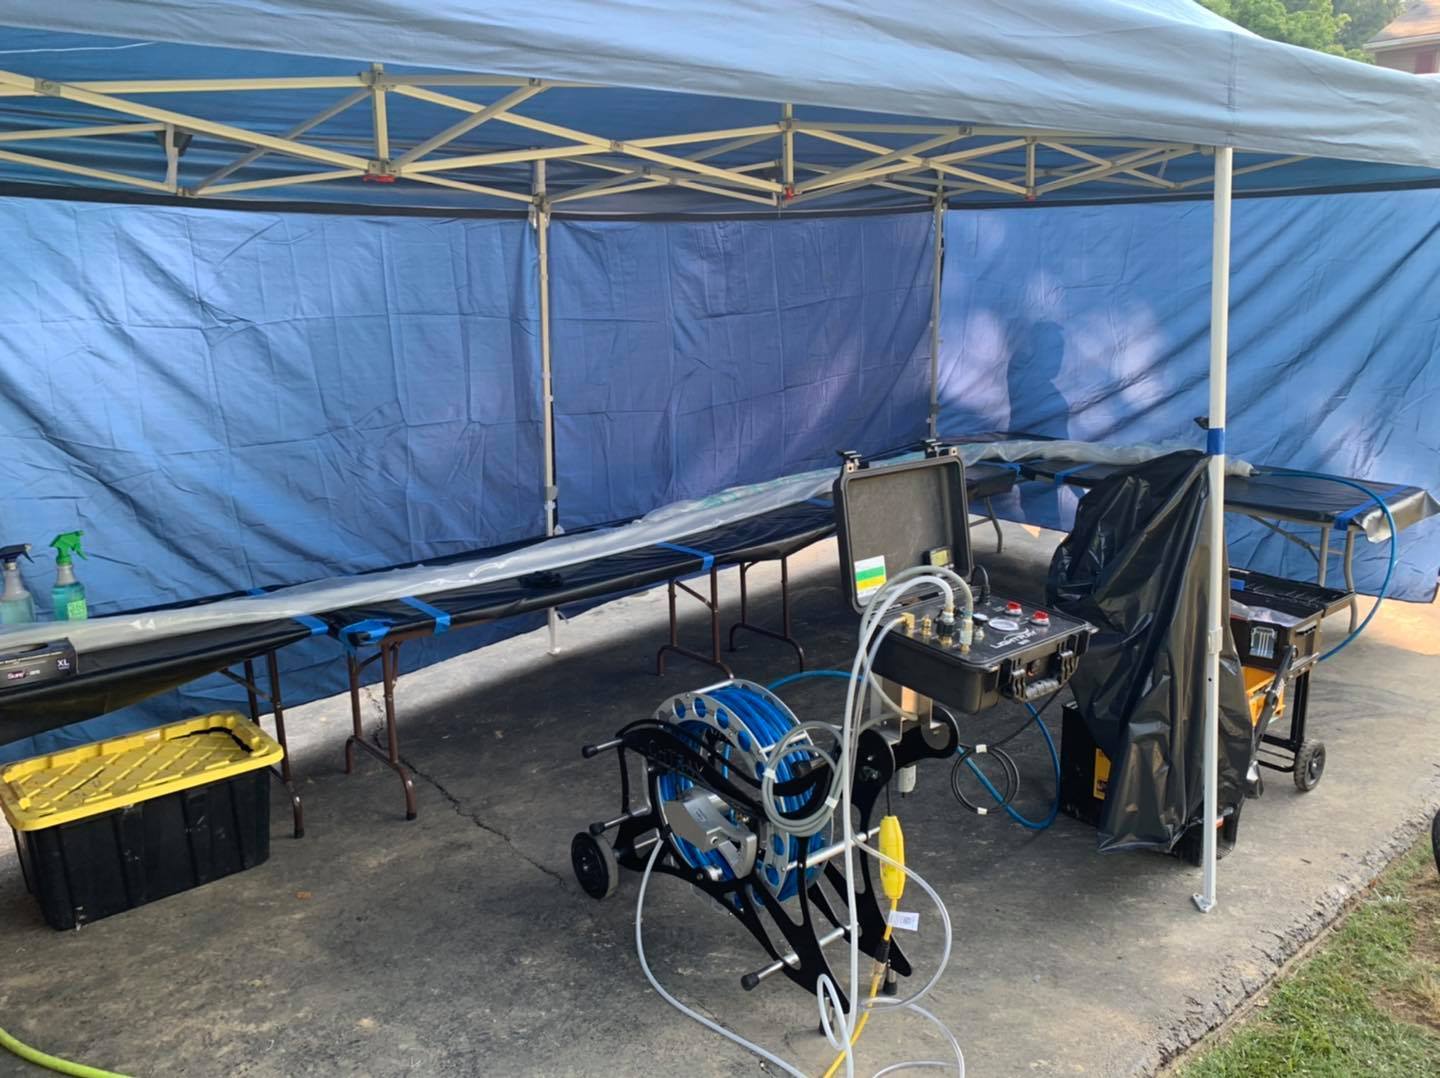 Job sites can be simplified with UV systems like the LightRay, meaning there’s less equipment for crews to operate and a smaller zone to control.